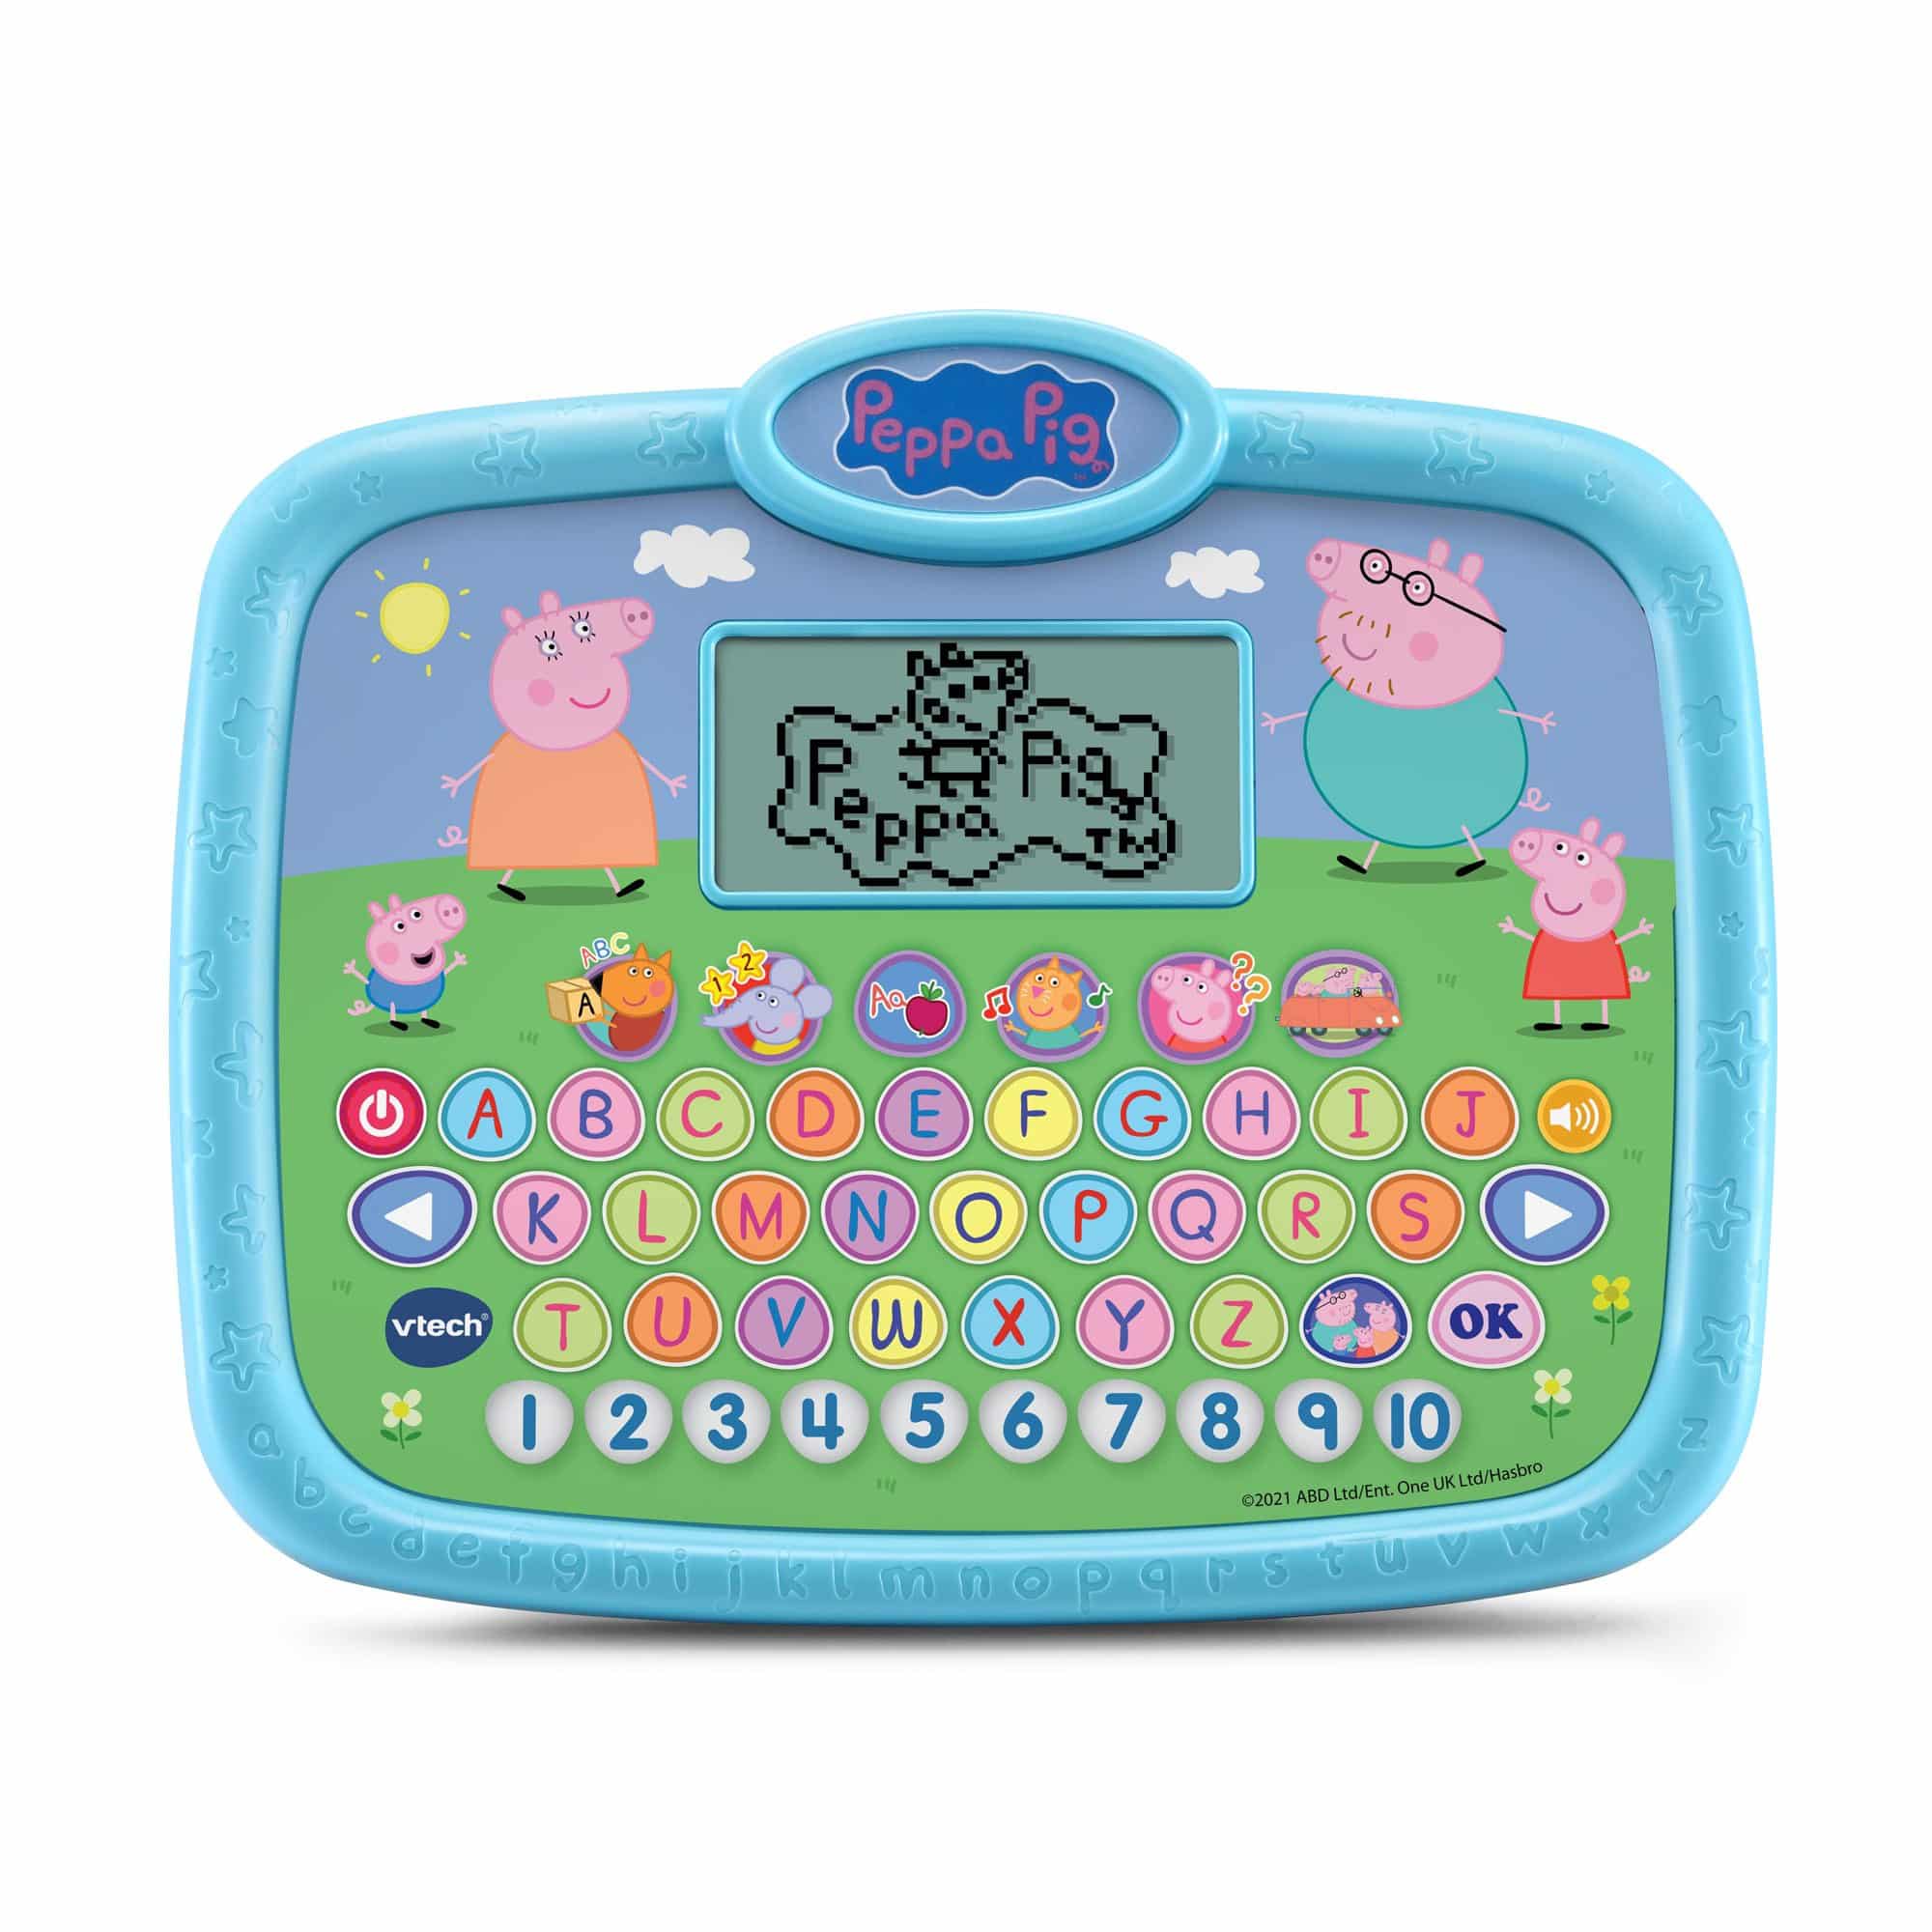 Vtech - Peppa Pig Learn & Explore Tablet